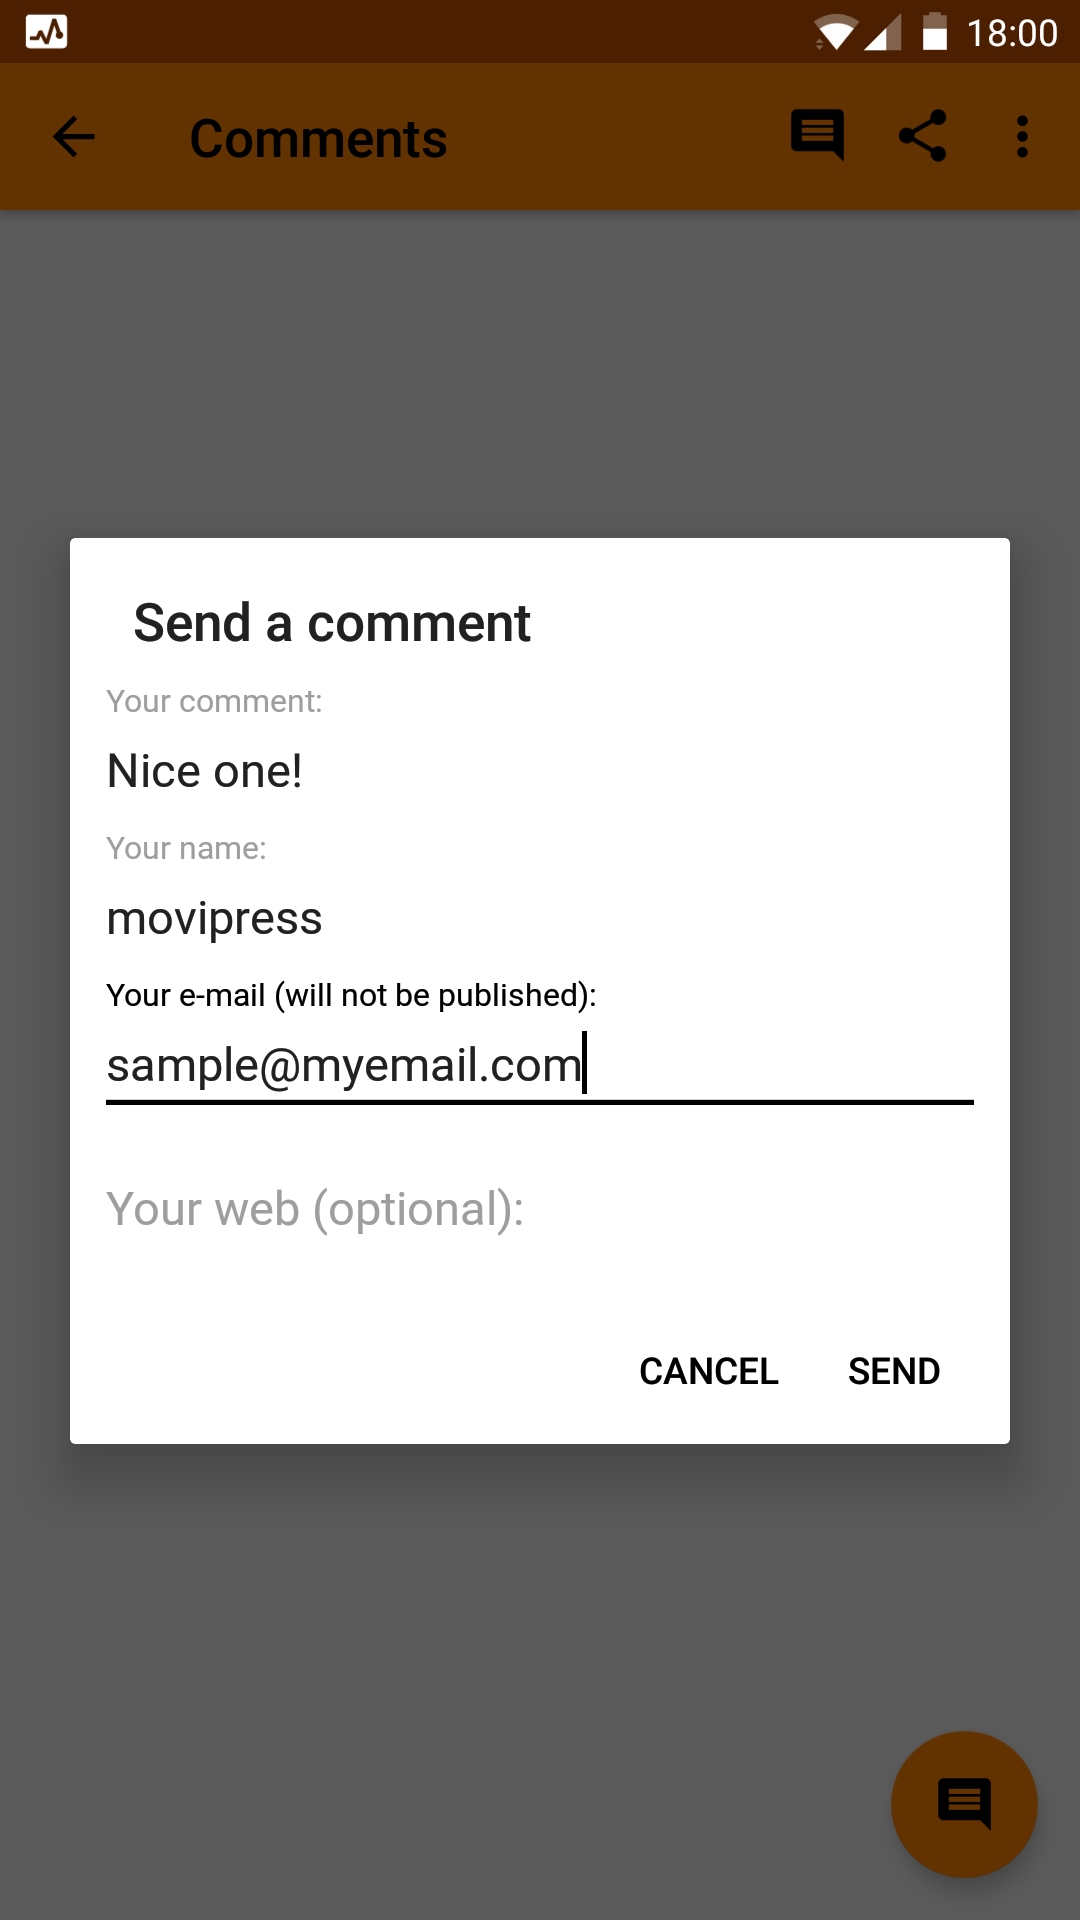 Comments view example.